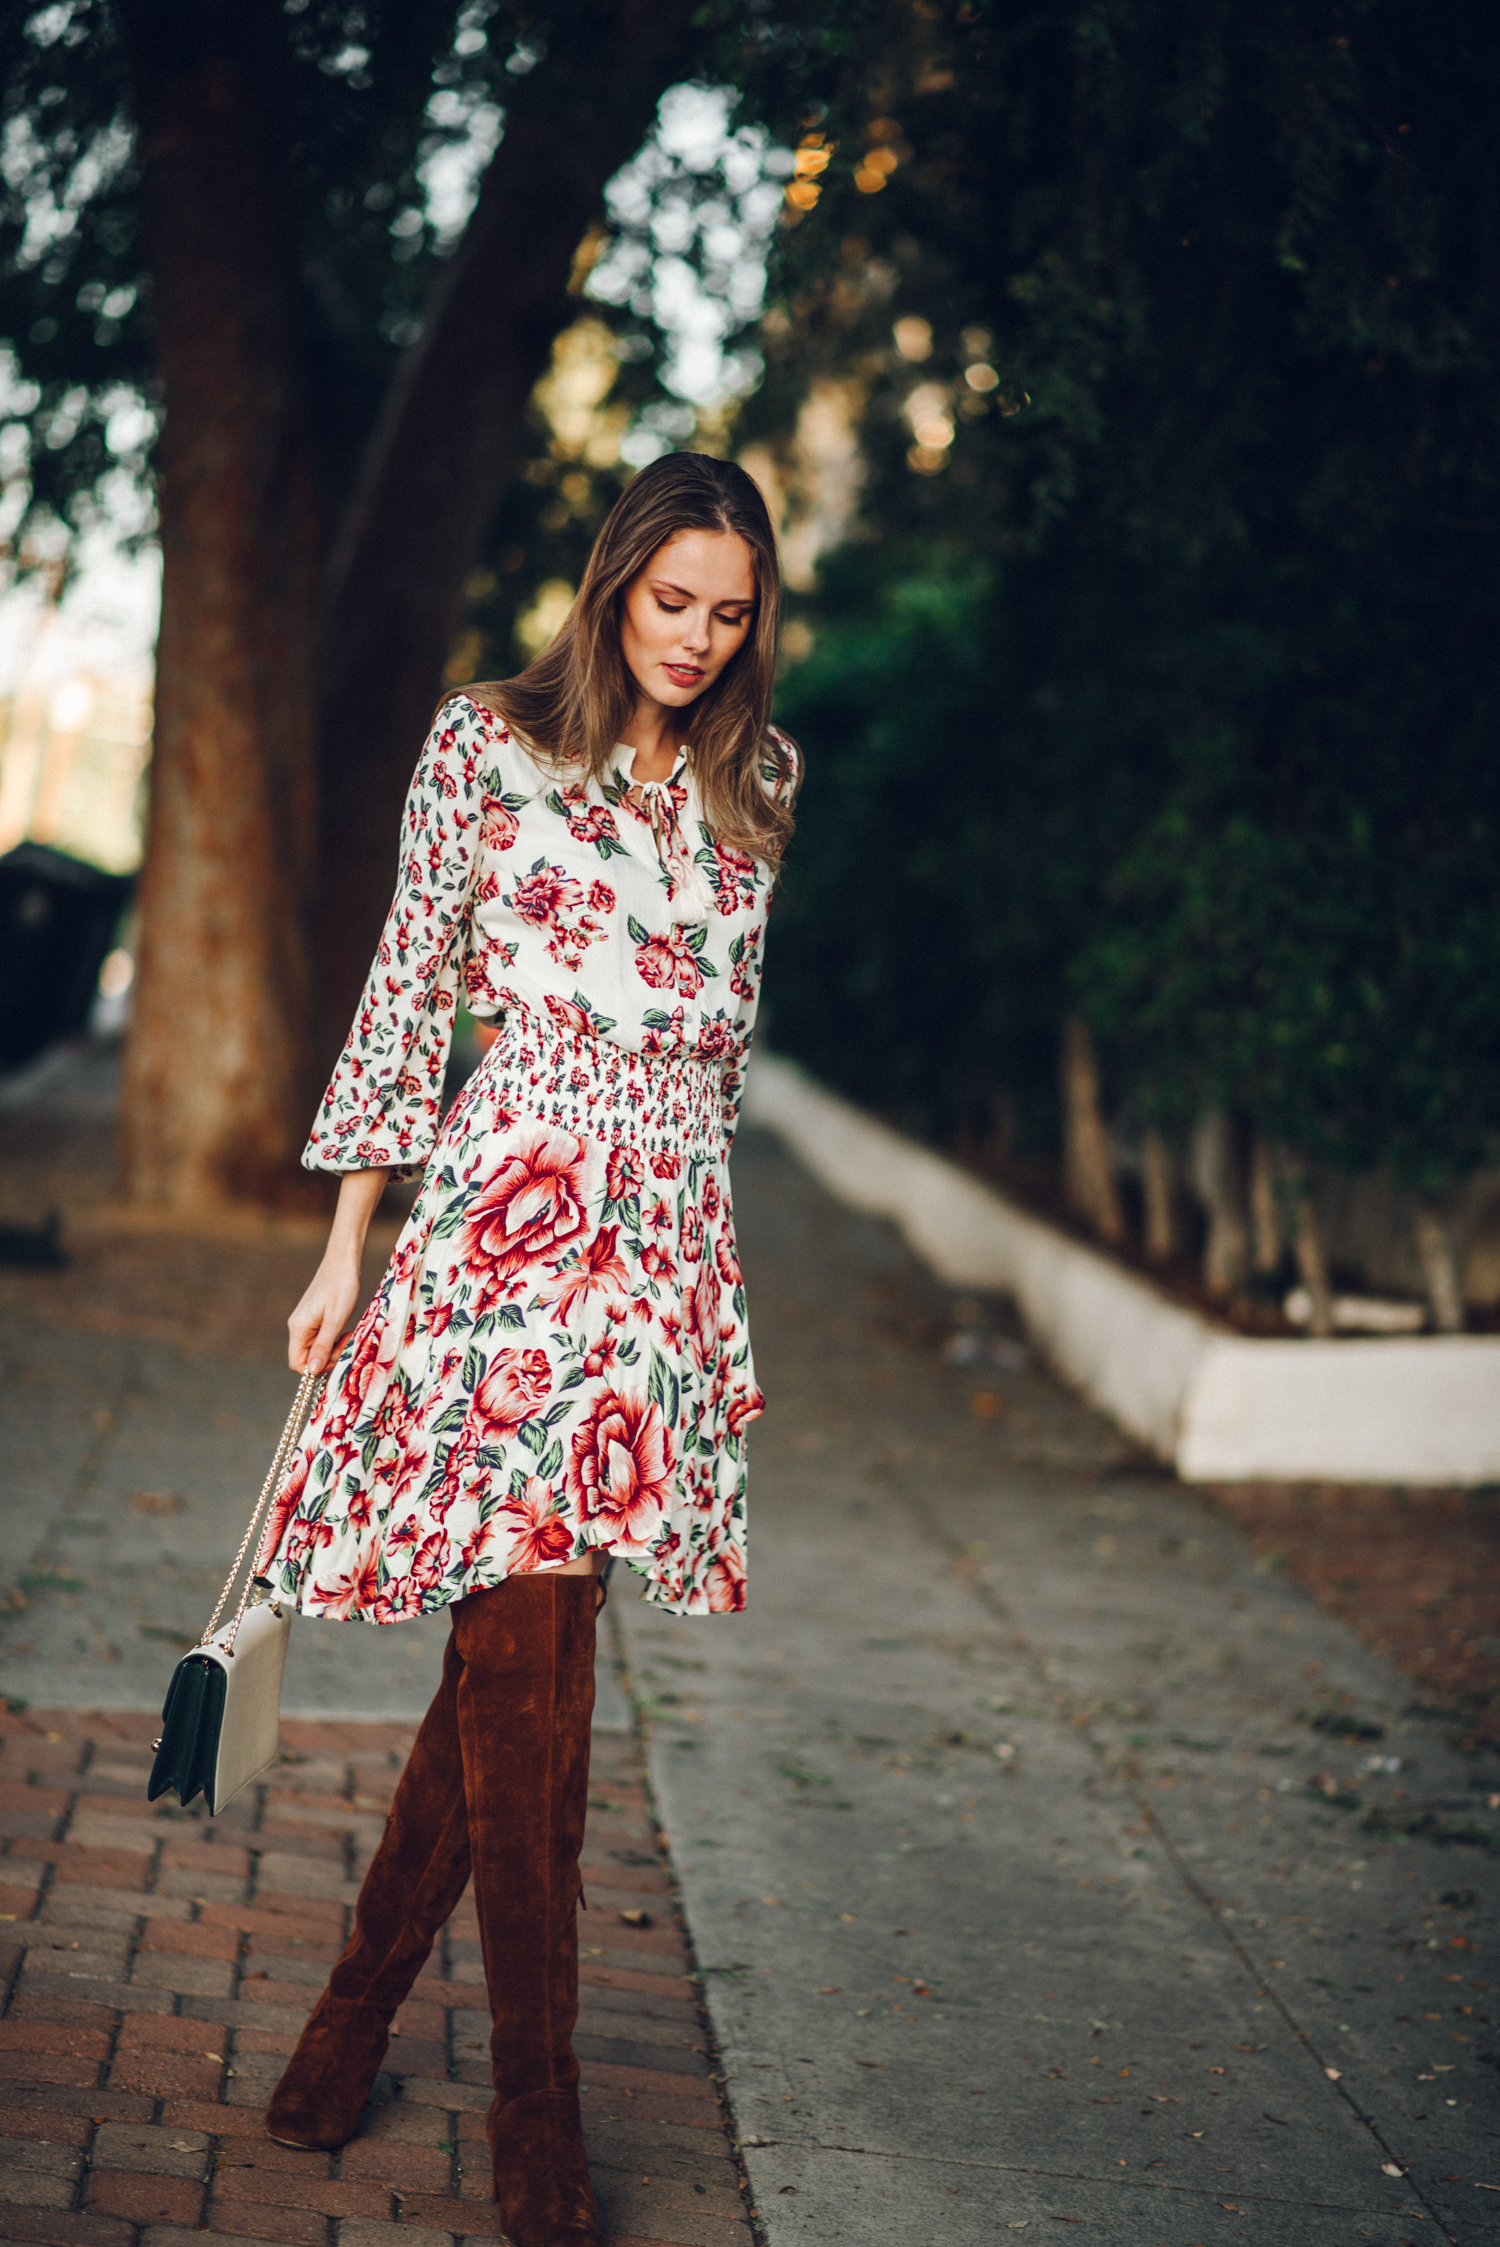 Alyssa Campanella of The A List blog shares the perfect fall floral dress wearing Farm Rio for Anthropologie